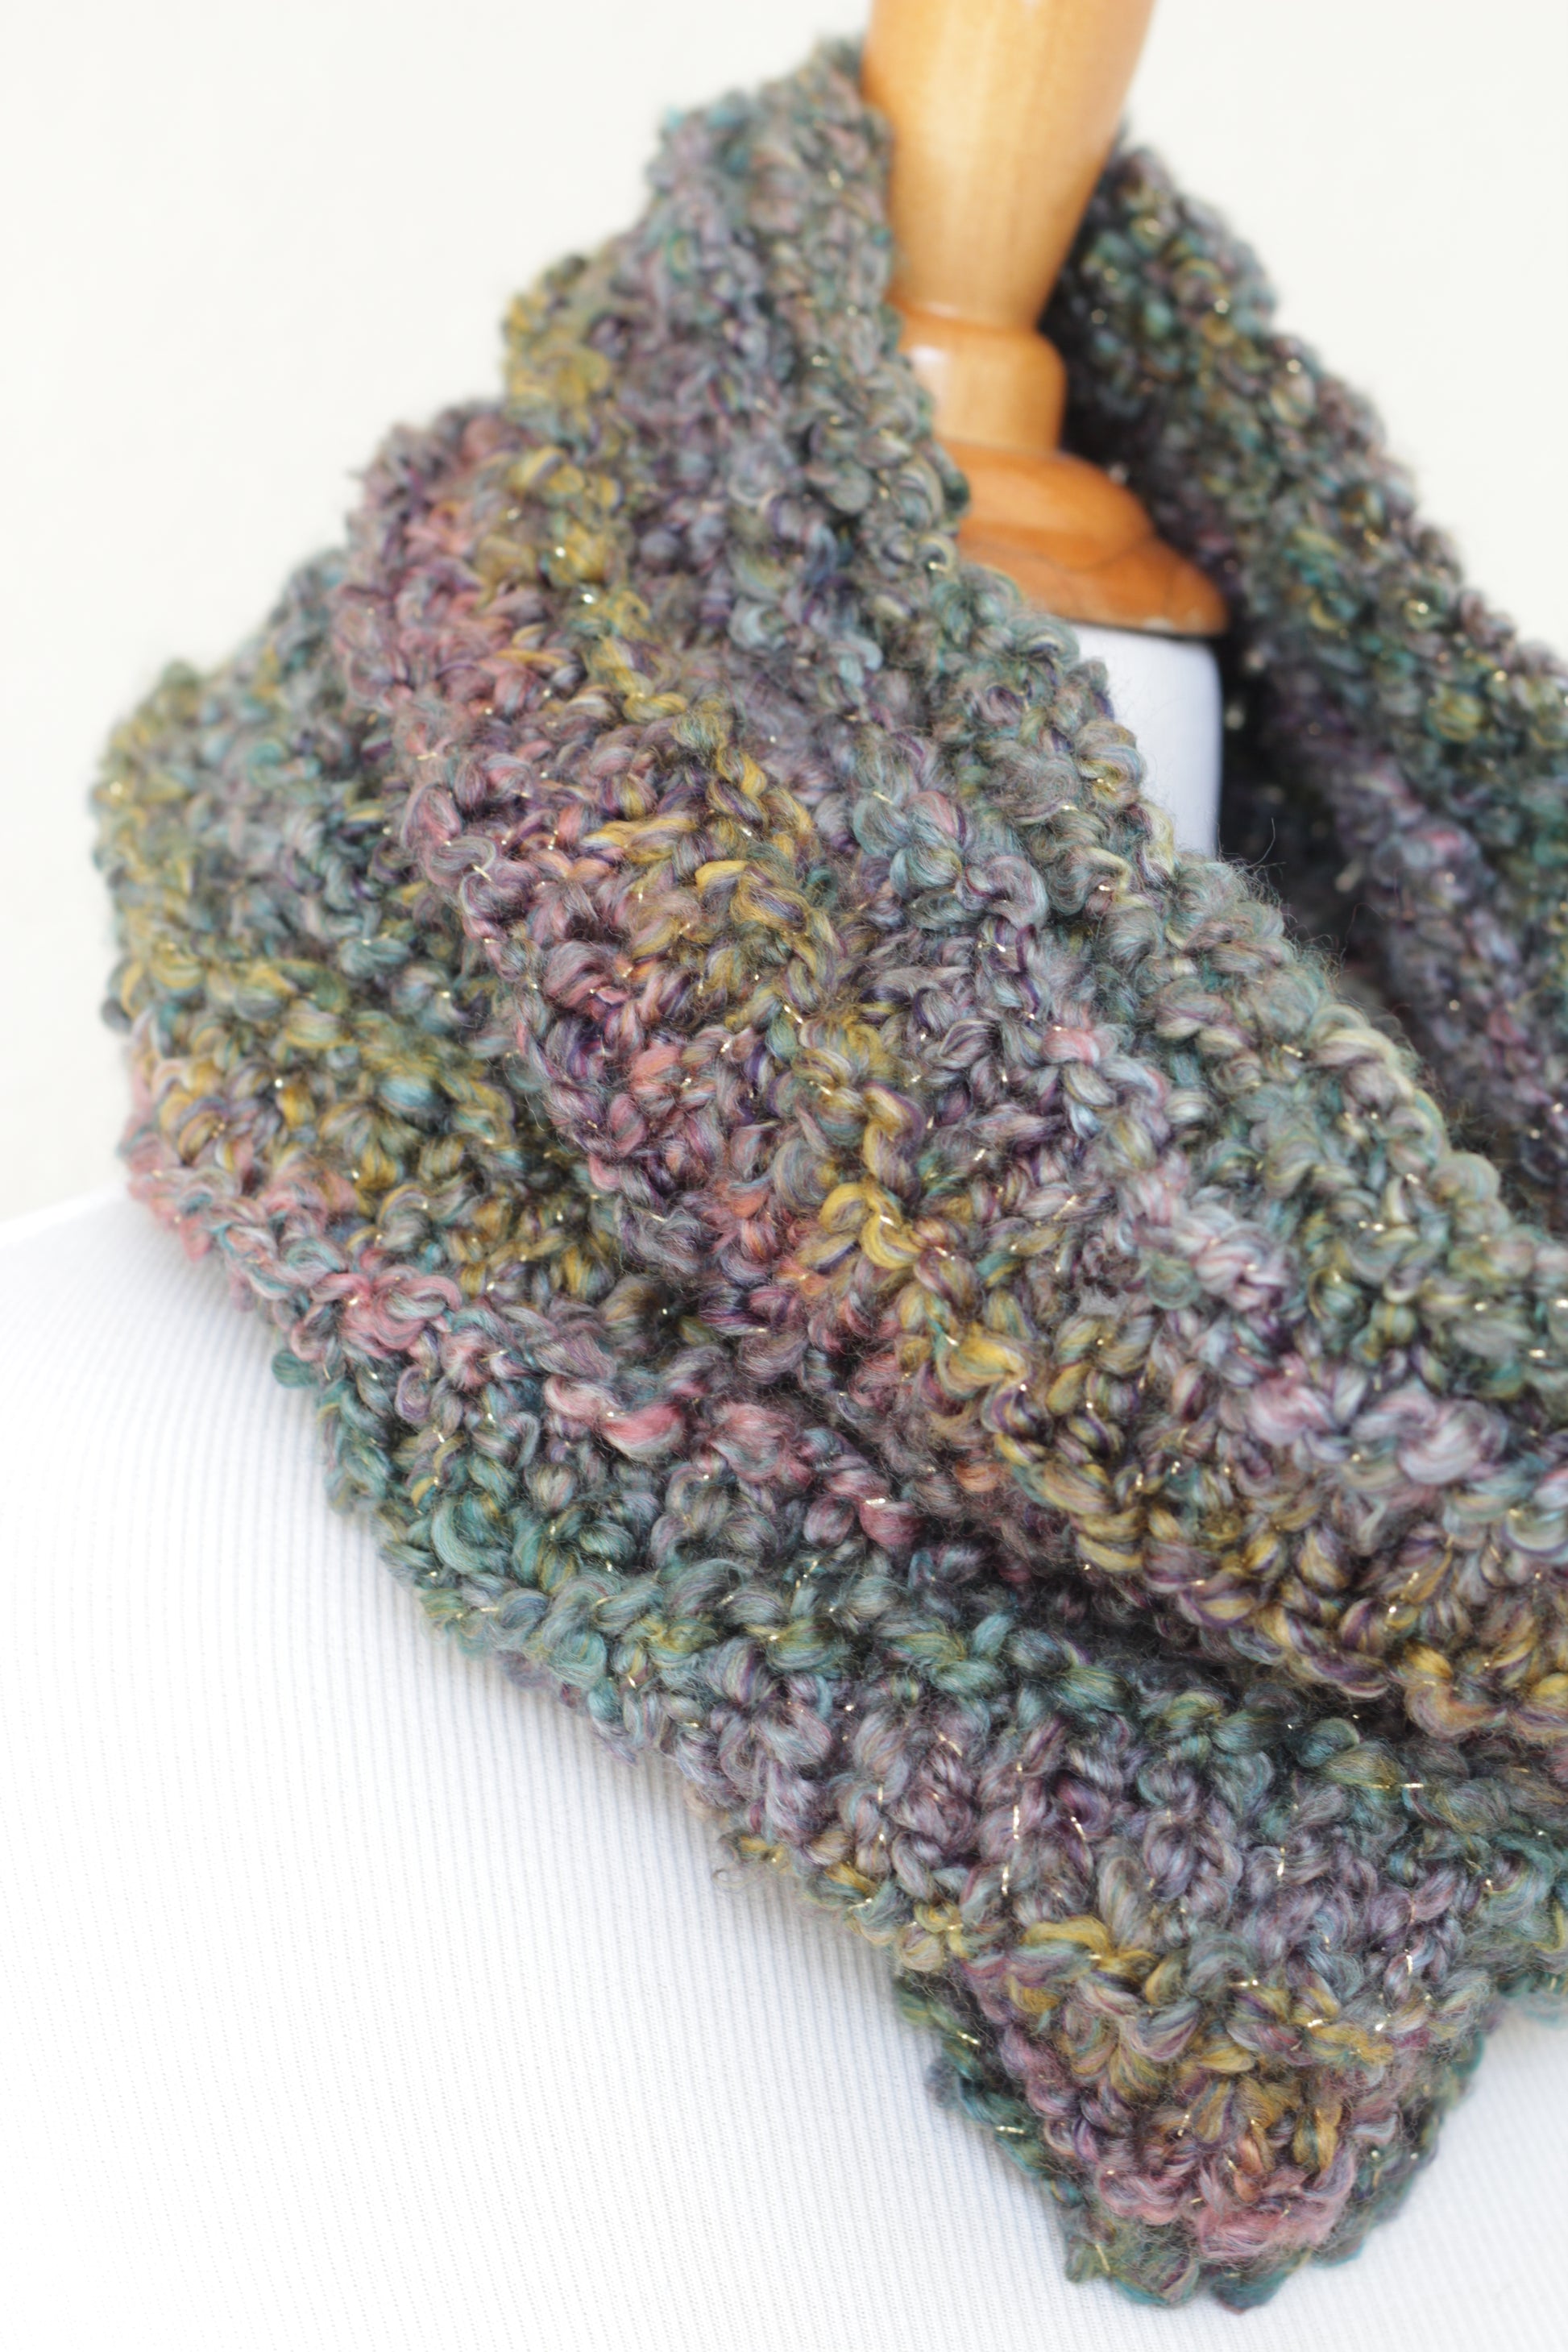 Crochet cowl in pink and bluw colors, chunky infinity scarf - 4 colorways available